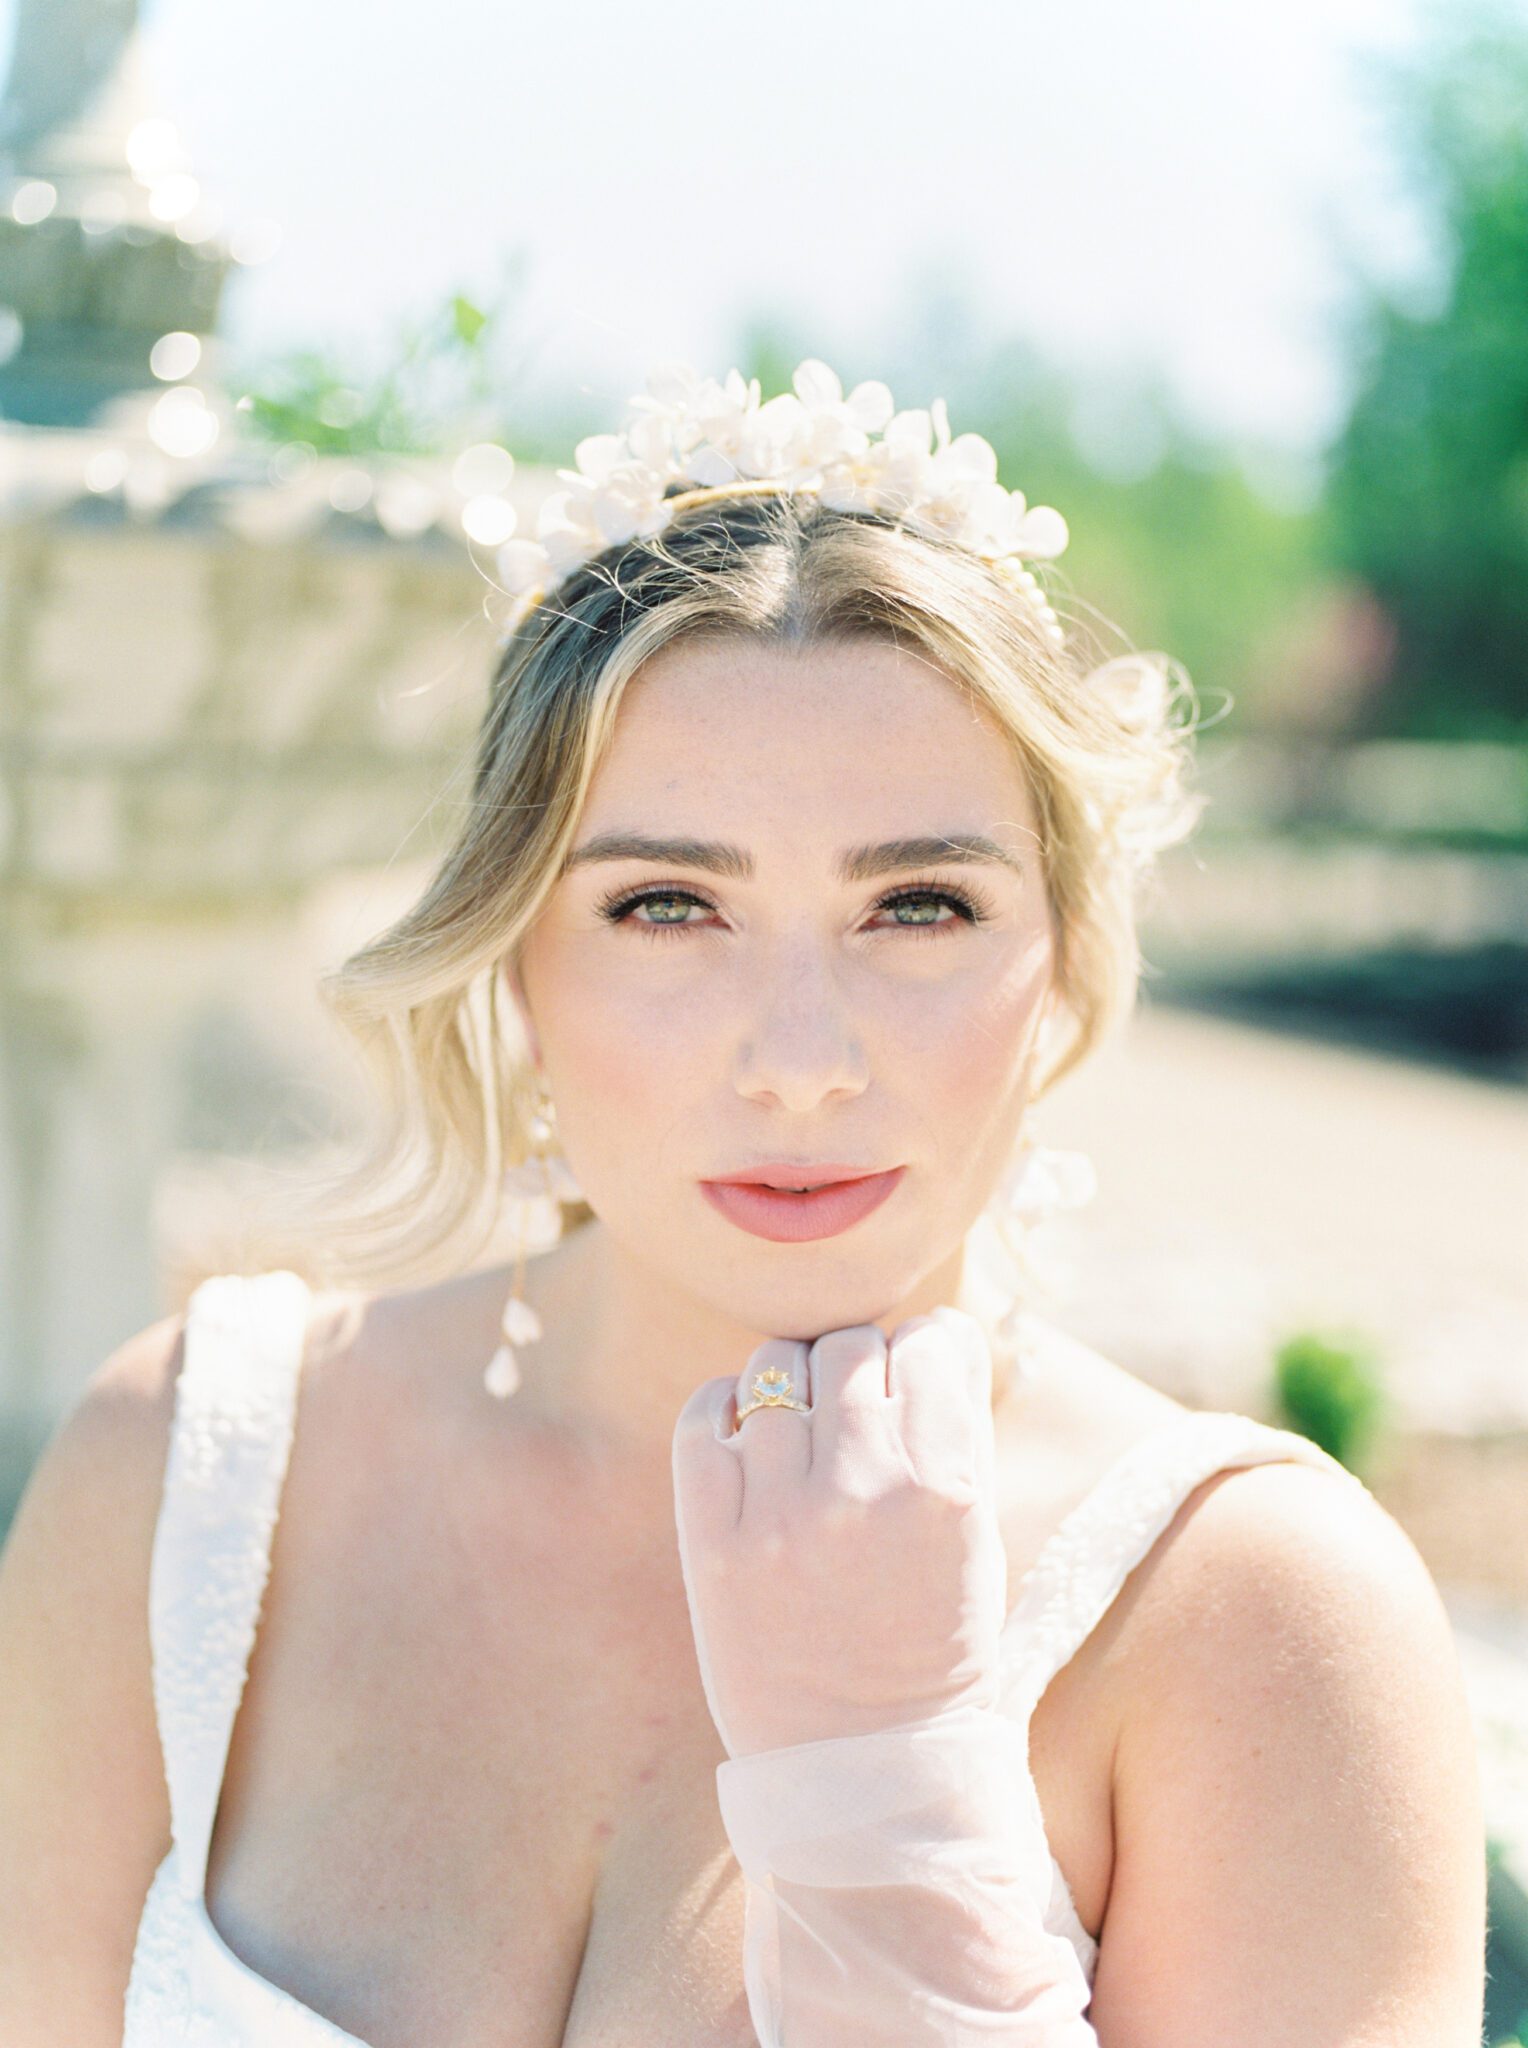 A beautiful bride wearing floral and pearl headpiece by Joanna Bisley Designs, featuring classic spring bridal makeup inspiration by Veil Beauty Co. Summer bridal fashion inspiration, sheer tulle bridal gloves and sophistication lace gown. 
